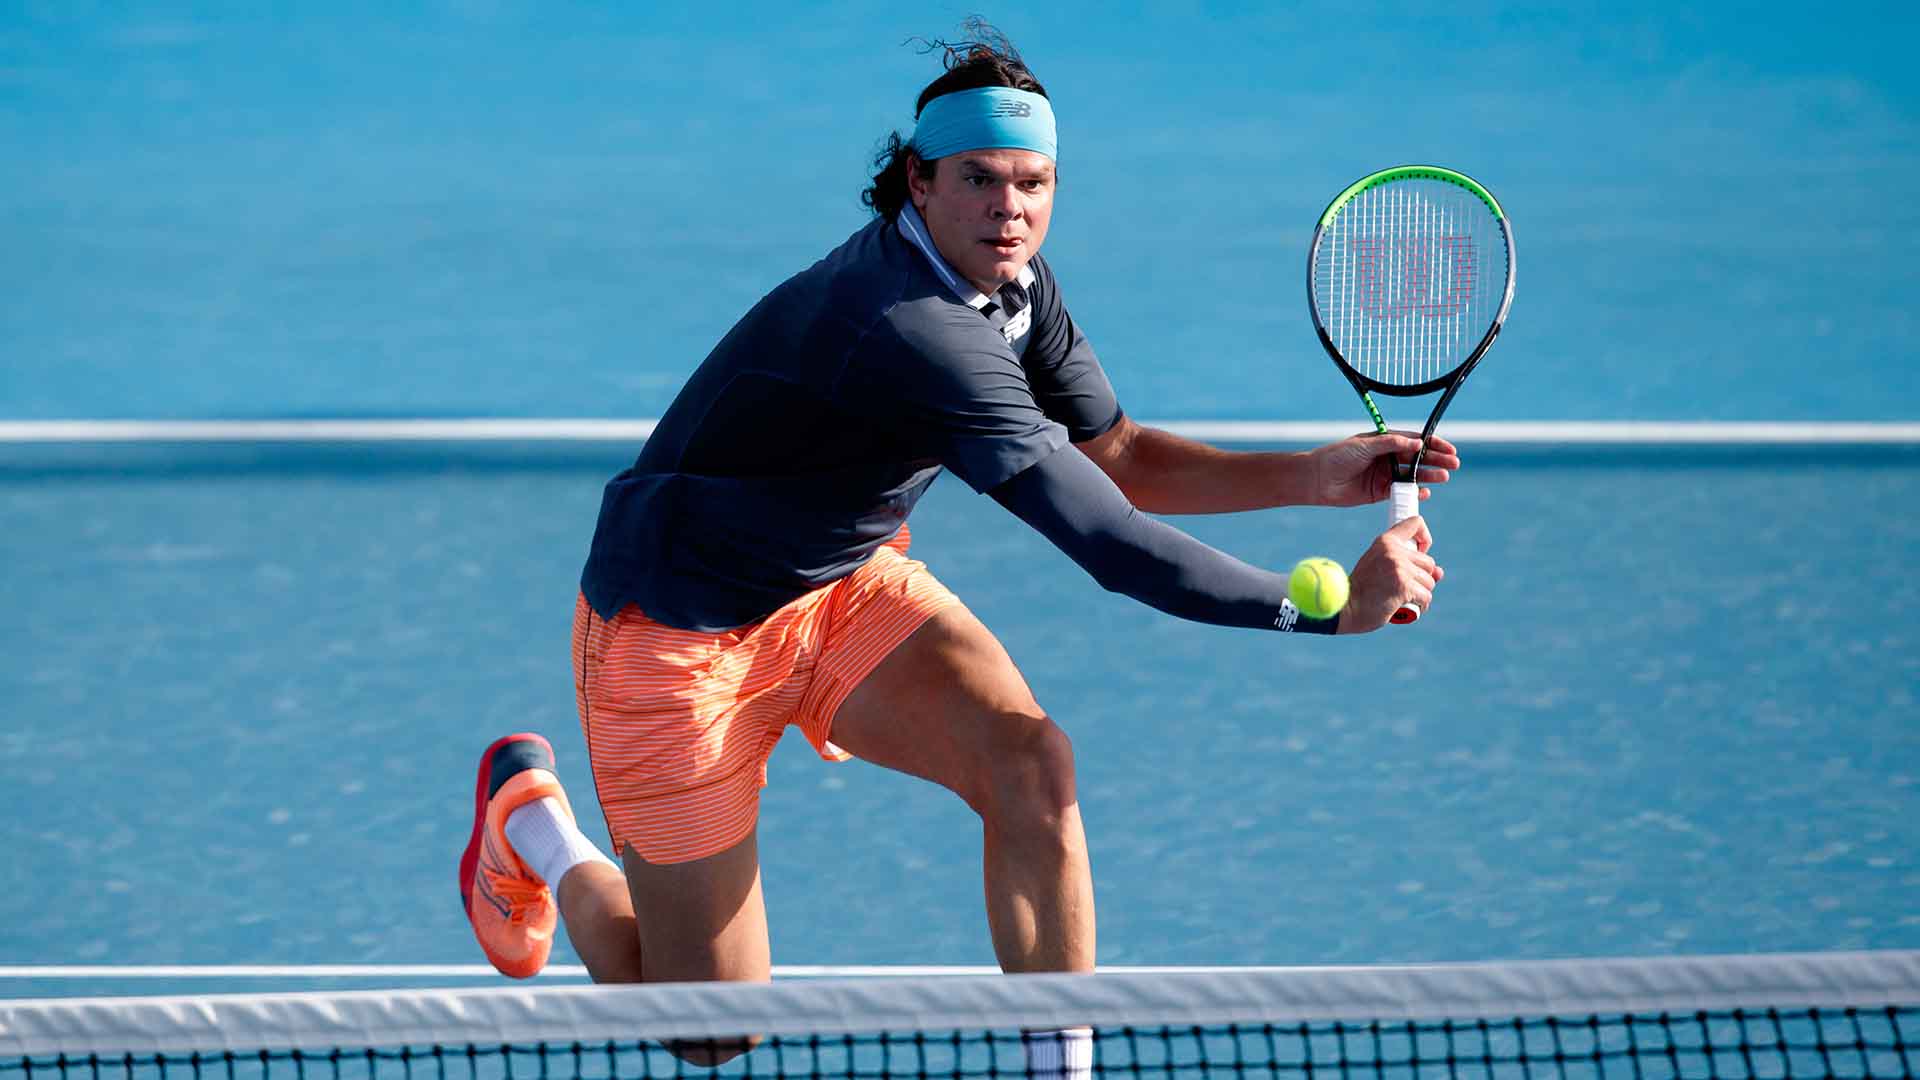 Milos Raonic wins 71 per cent of net points (25/35) to defeat Marton Fucsovics in four sets at the Australian Open on Friday.